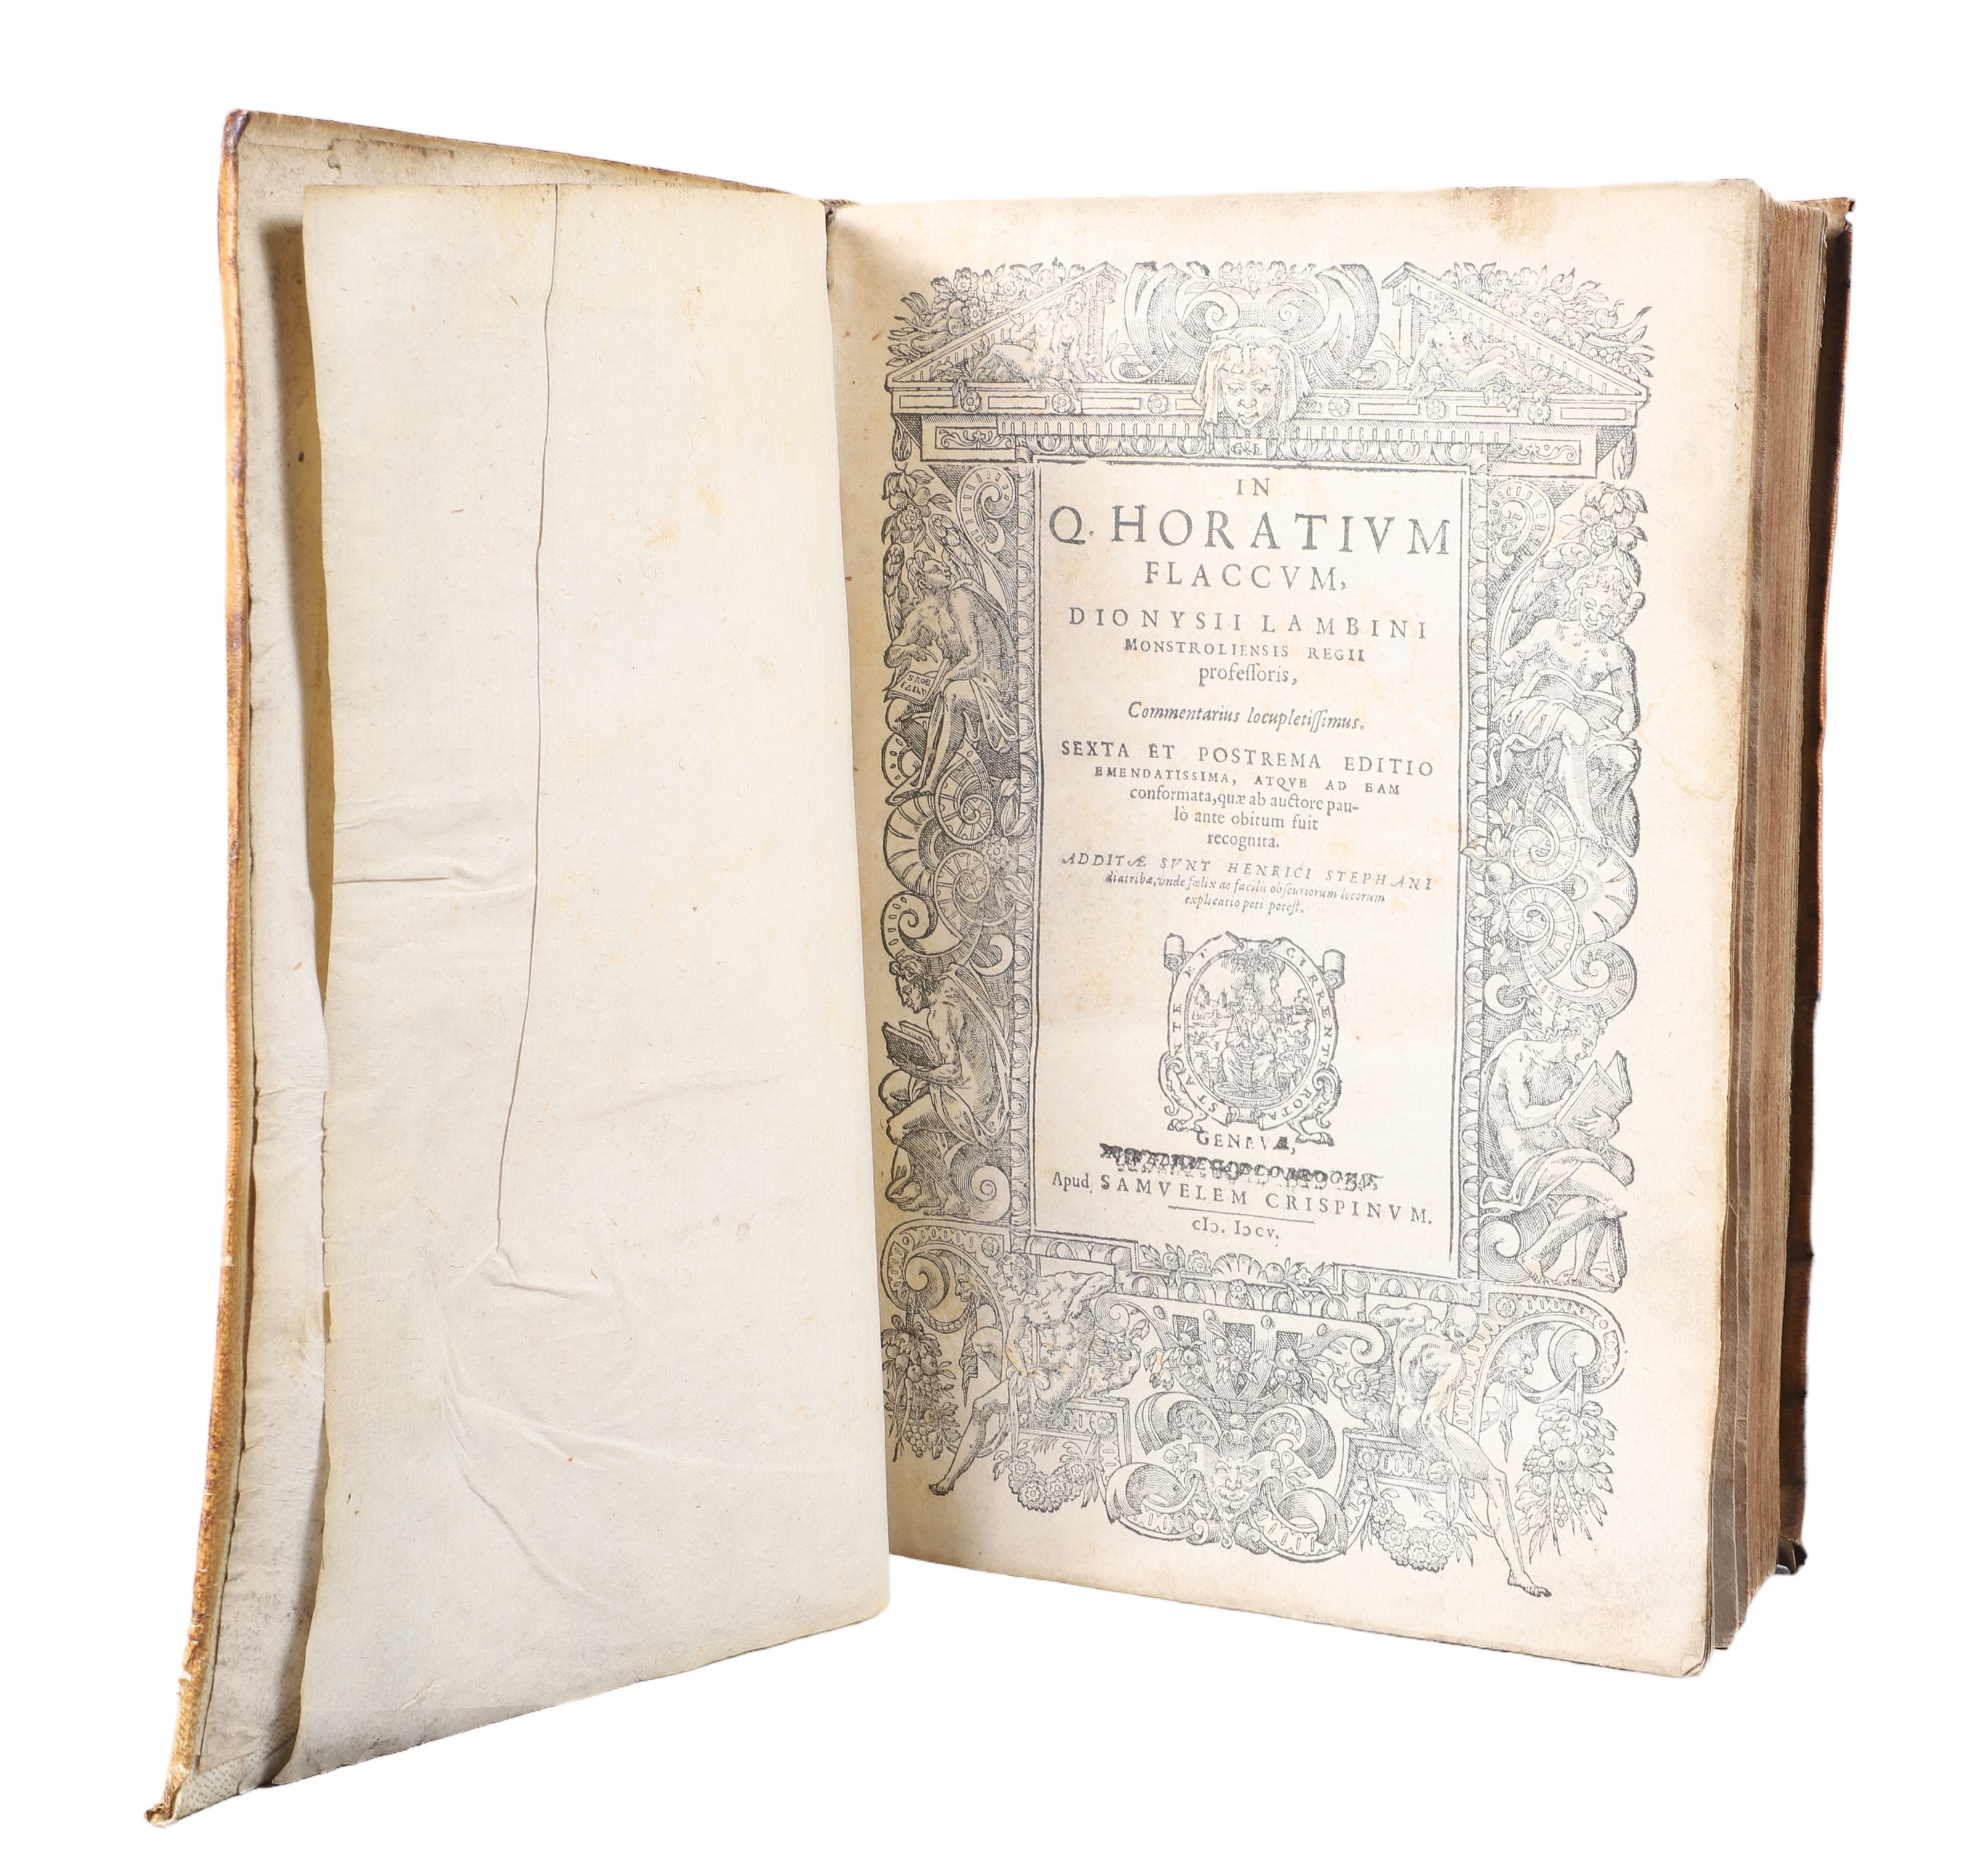 A book of Horace from 1605, titled